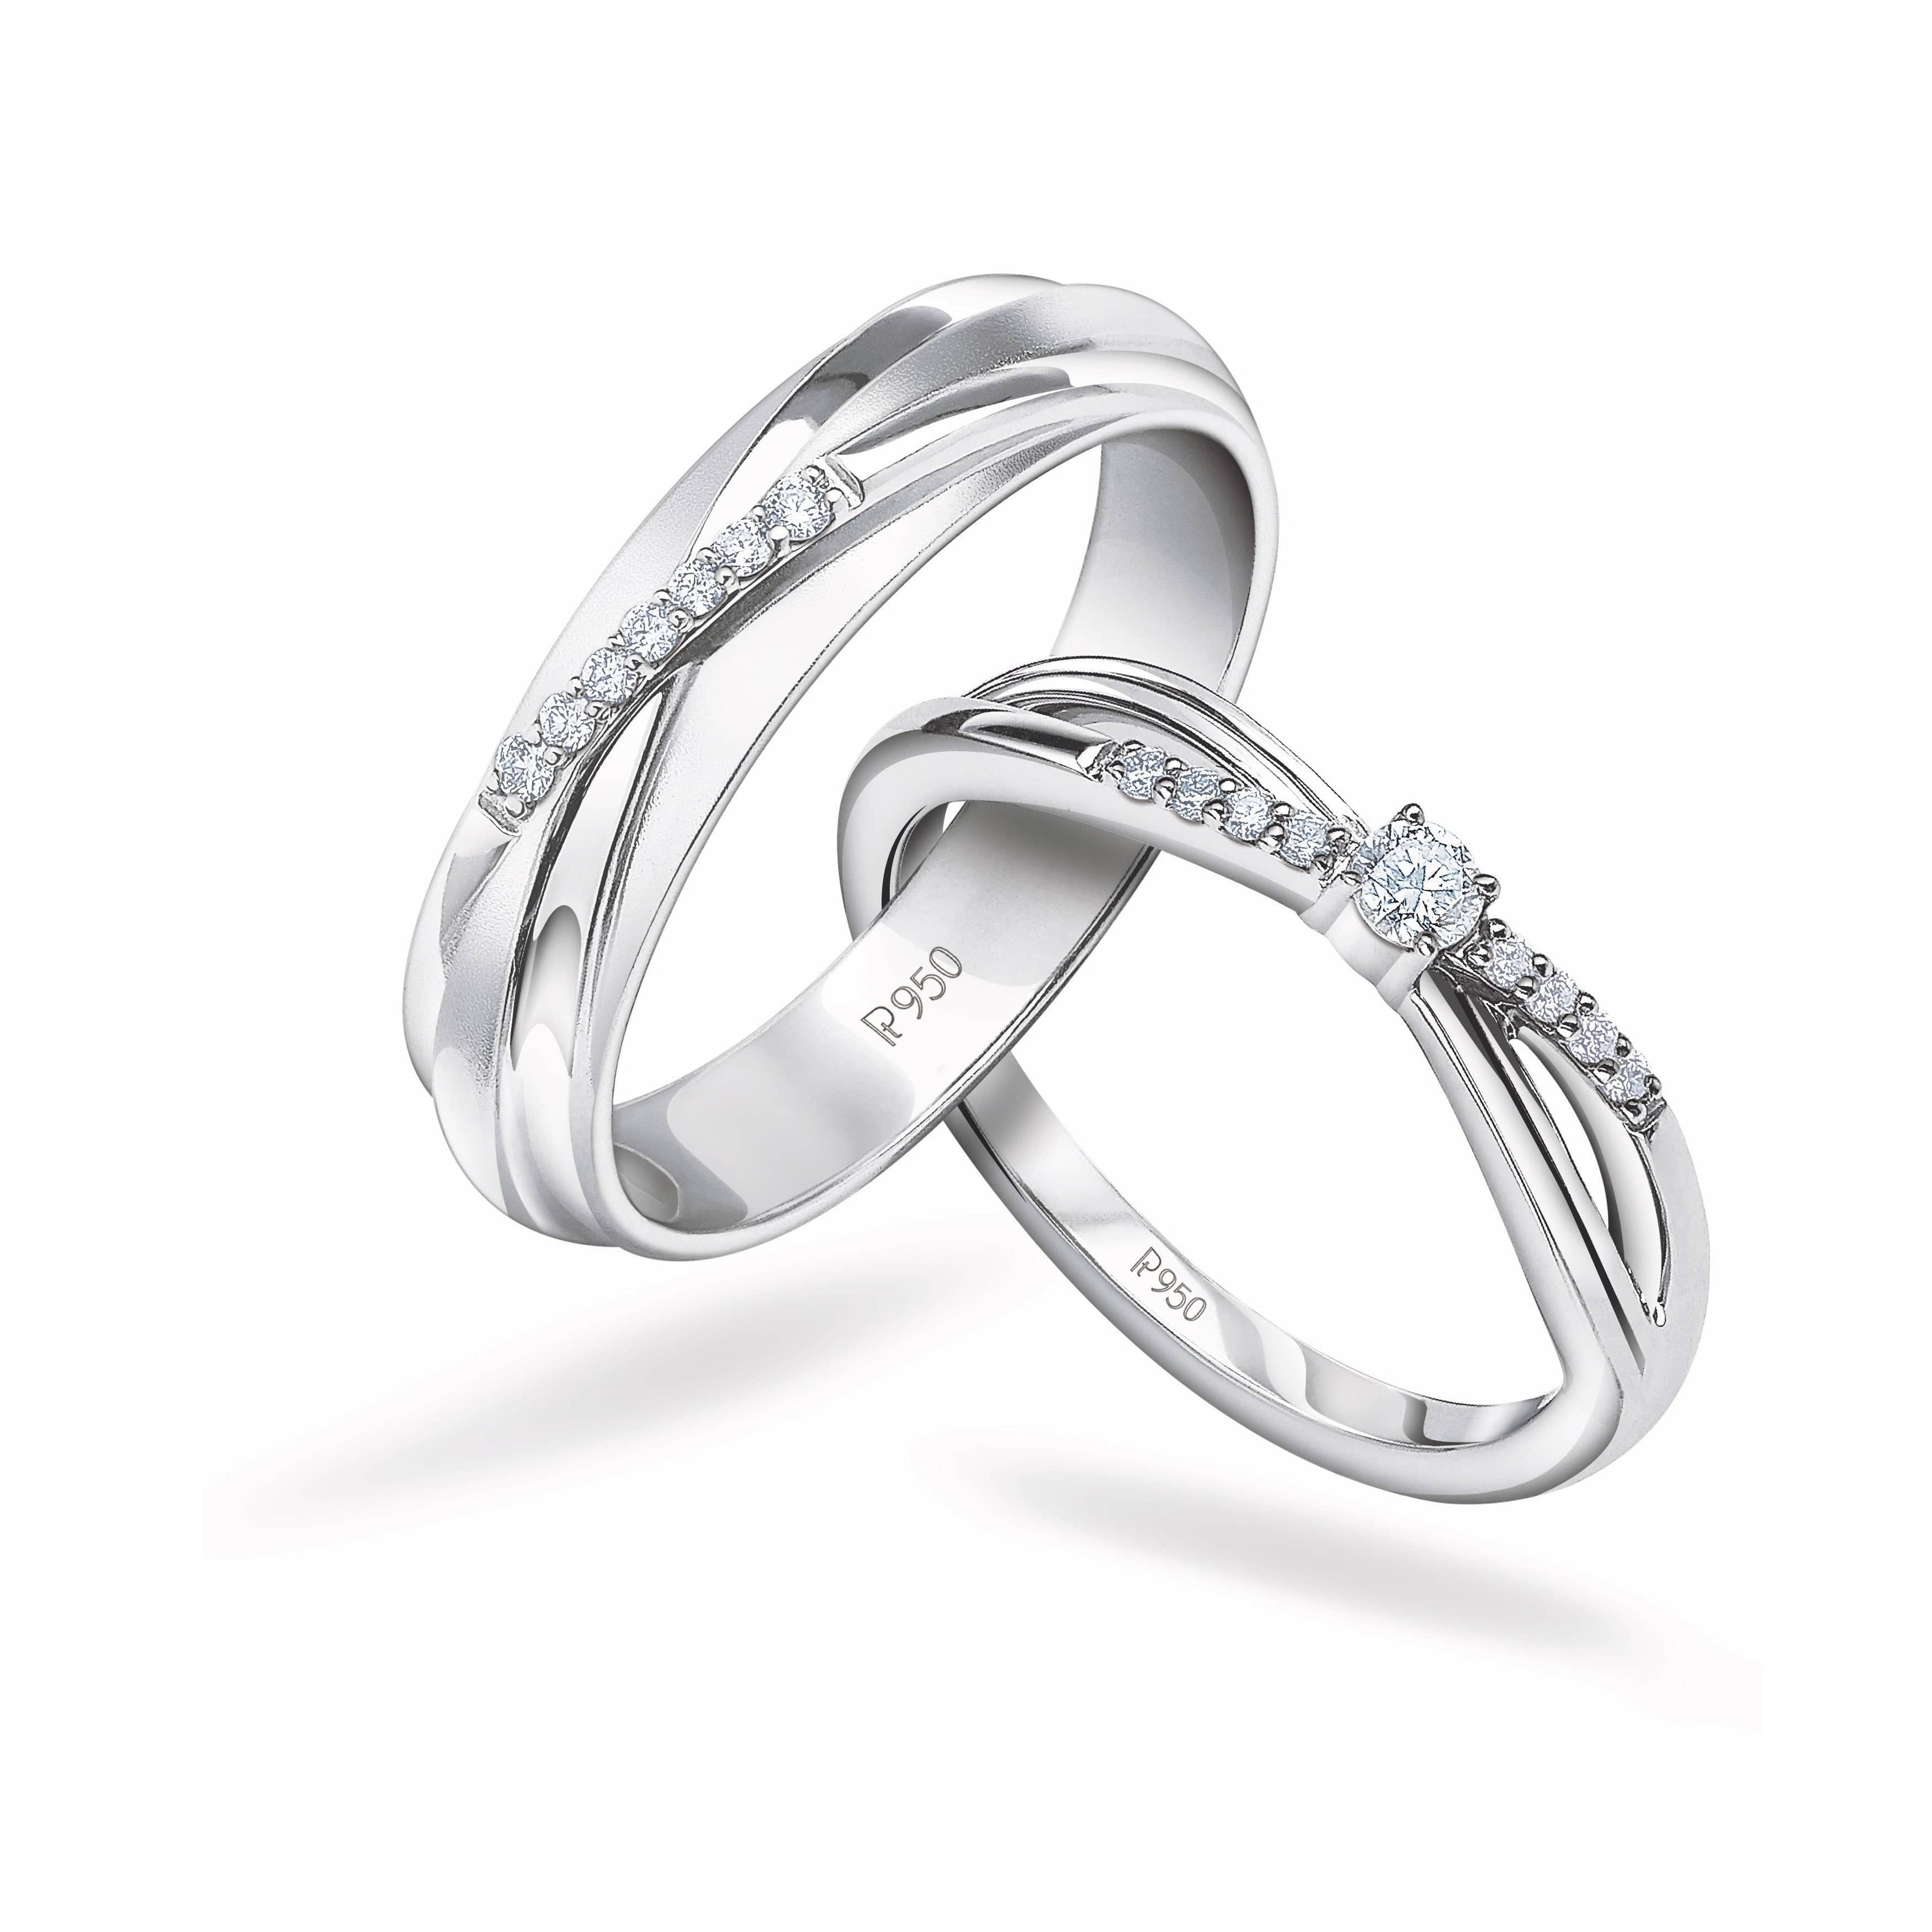 Download A beautiful set of wedding rings, capturing the perfect moment  with a promise of never-ending love. | Wallpapers.com